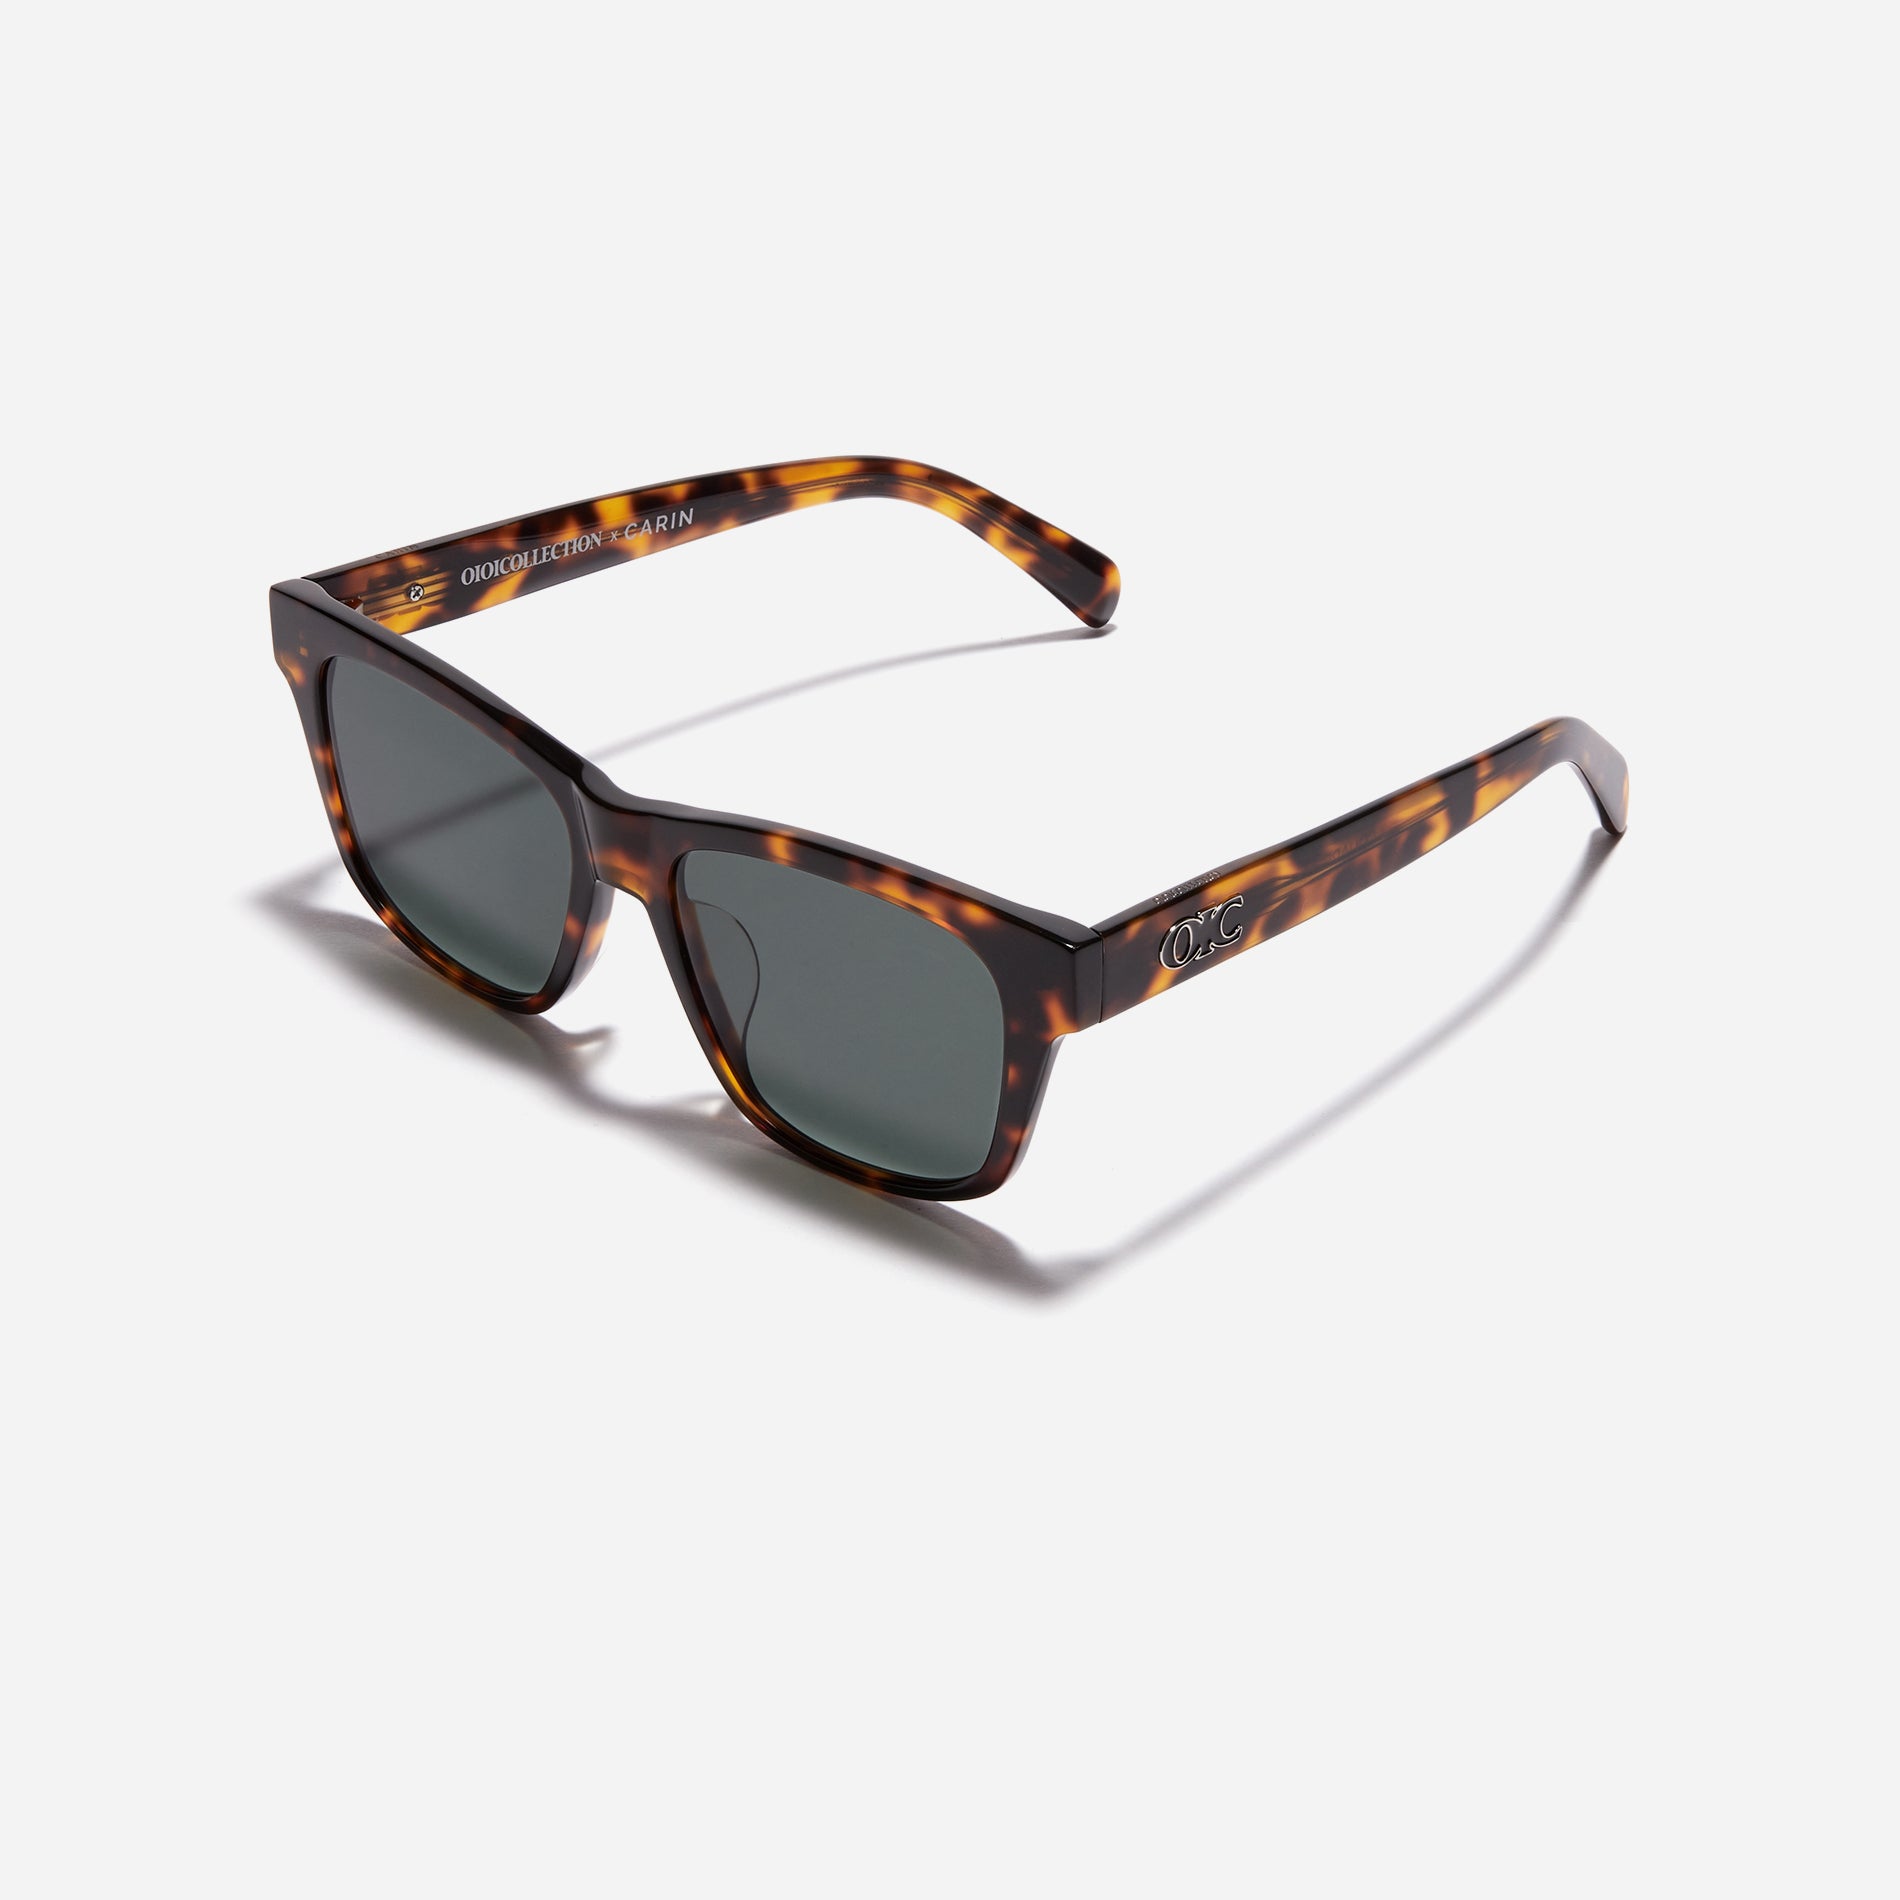 Born from the CARIN x OIOICOLLECTION collaboration, the SQUARE sunglasses are designed with a sleek narrow rim style that gives a modern twist to the '90s retro vibe. The temples showcase a newly redesigned OIC logo emblem, highlighted by a soft color palette, adding a touch of fashion-forward style.